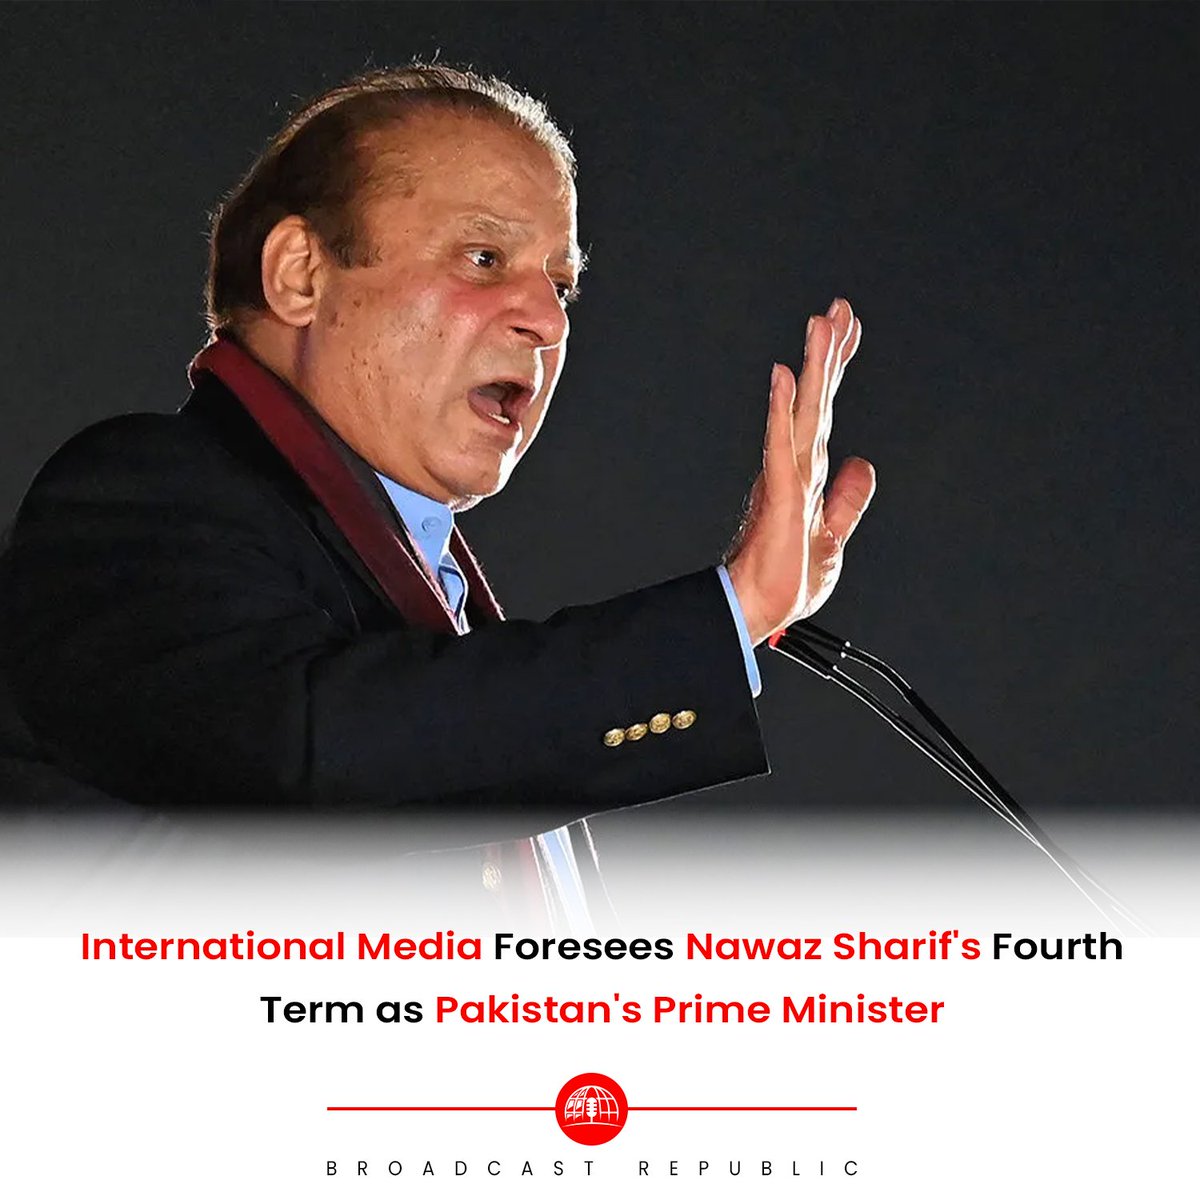 The possibility of Nawaz Sharif making a comeback in Pakistan's 2024 general elections has captured the attention of international media outlets, including the BBC, Guardian, and AFP. 

#BroadcastRepublic #NawazSharif #PakistanElections #PoliticalForecast #Geopolitics